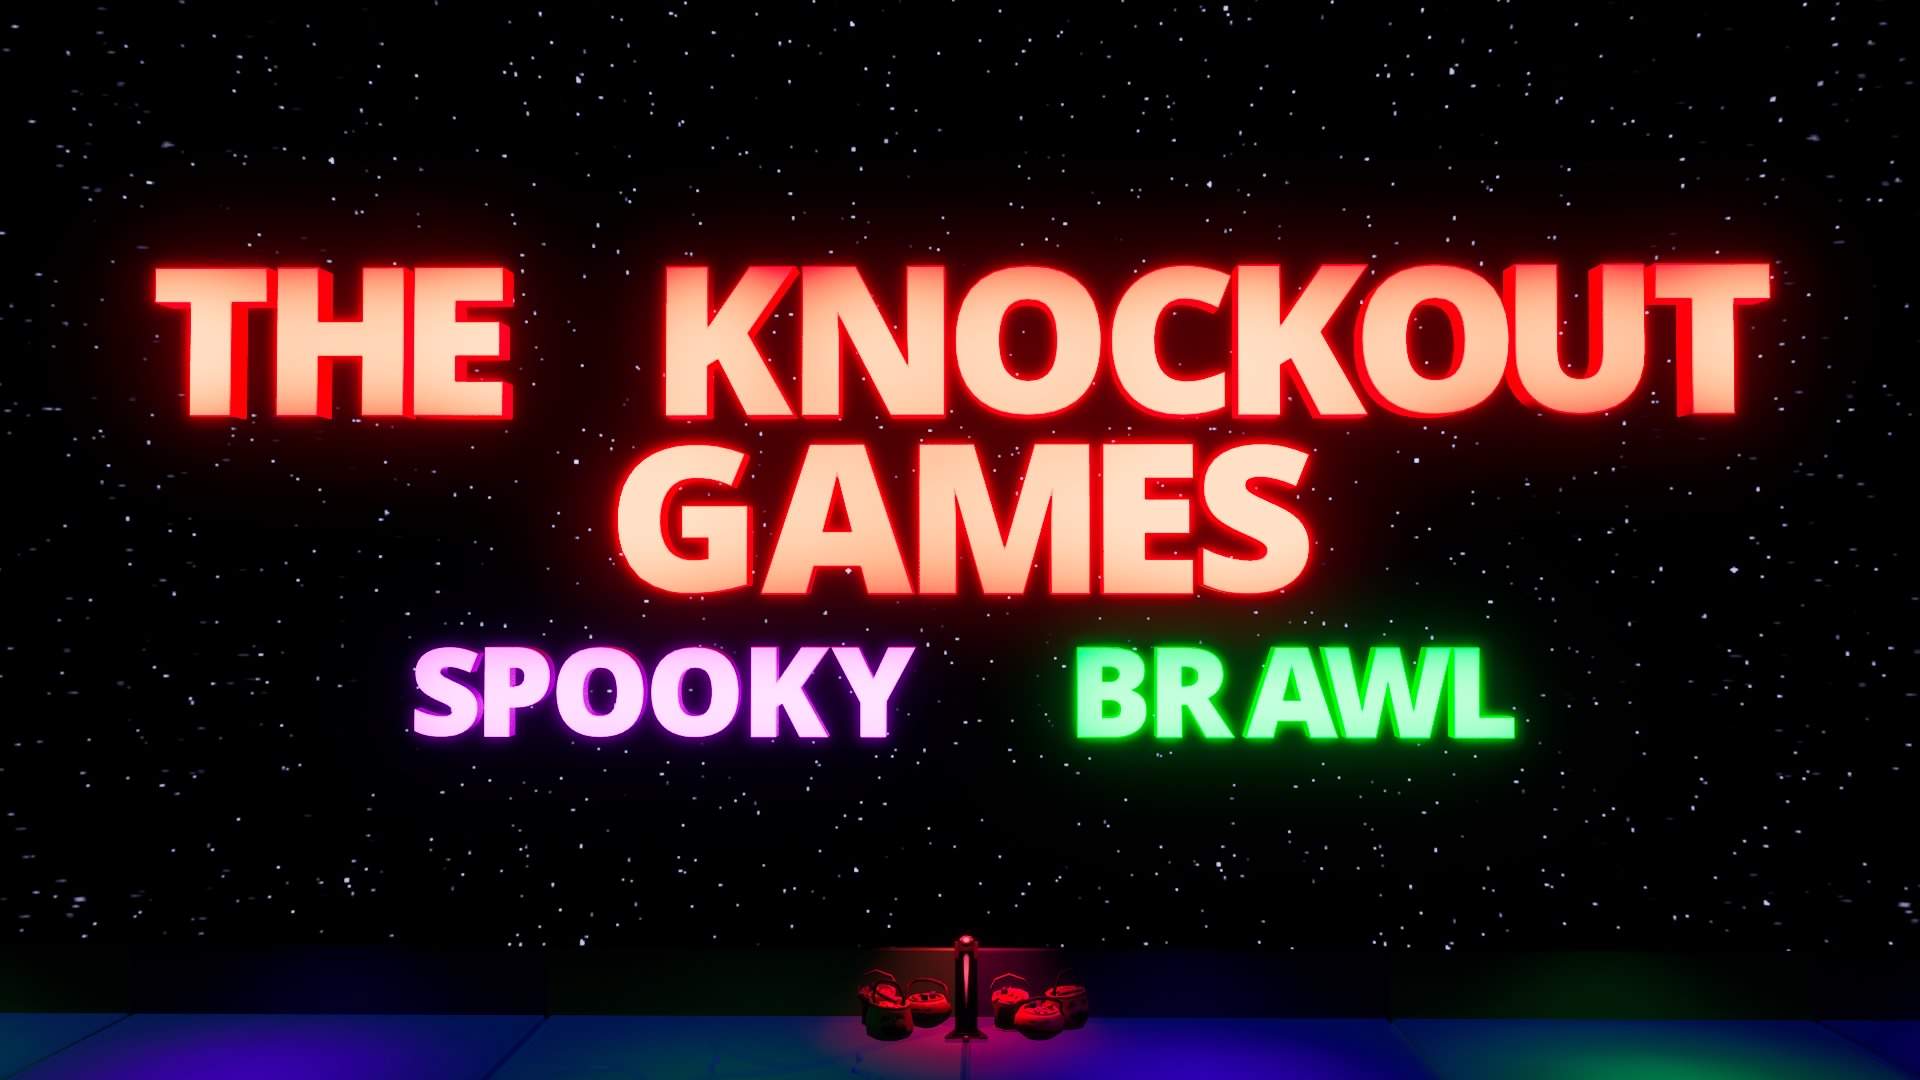 The Knockout Games - Spooky brawl